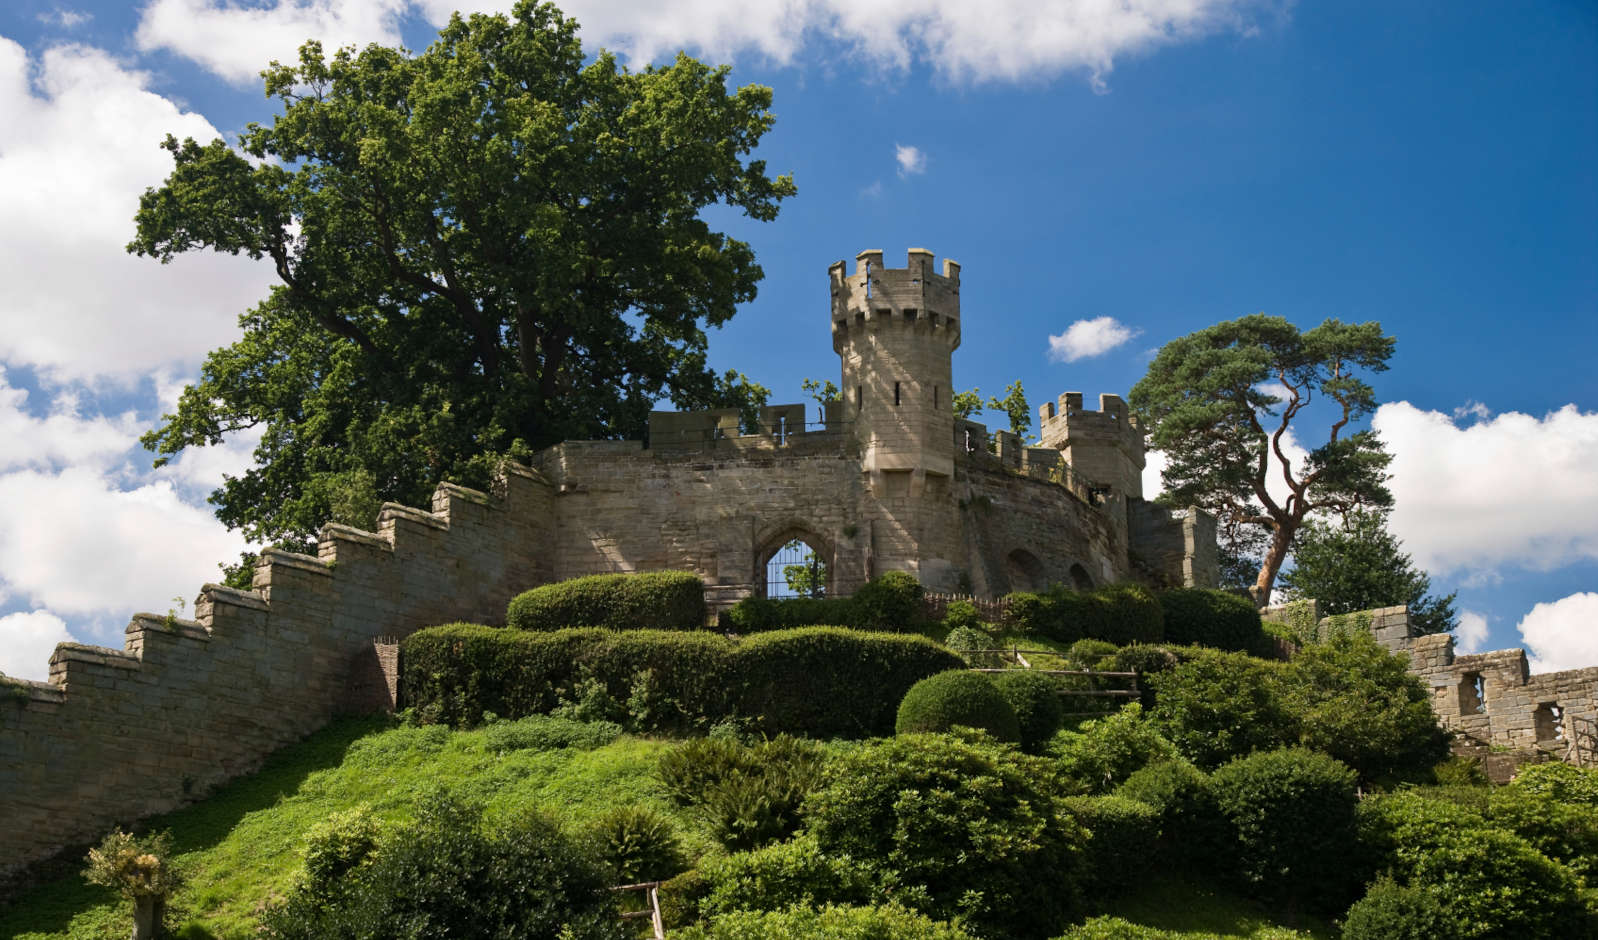 Save on Multi Attraction Tickets and visit Warwick Castle today!